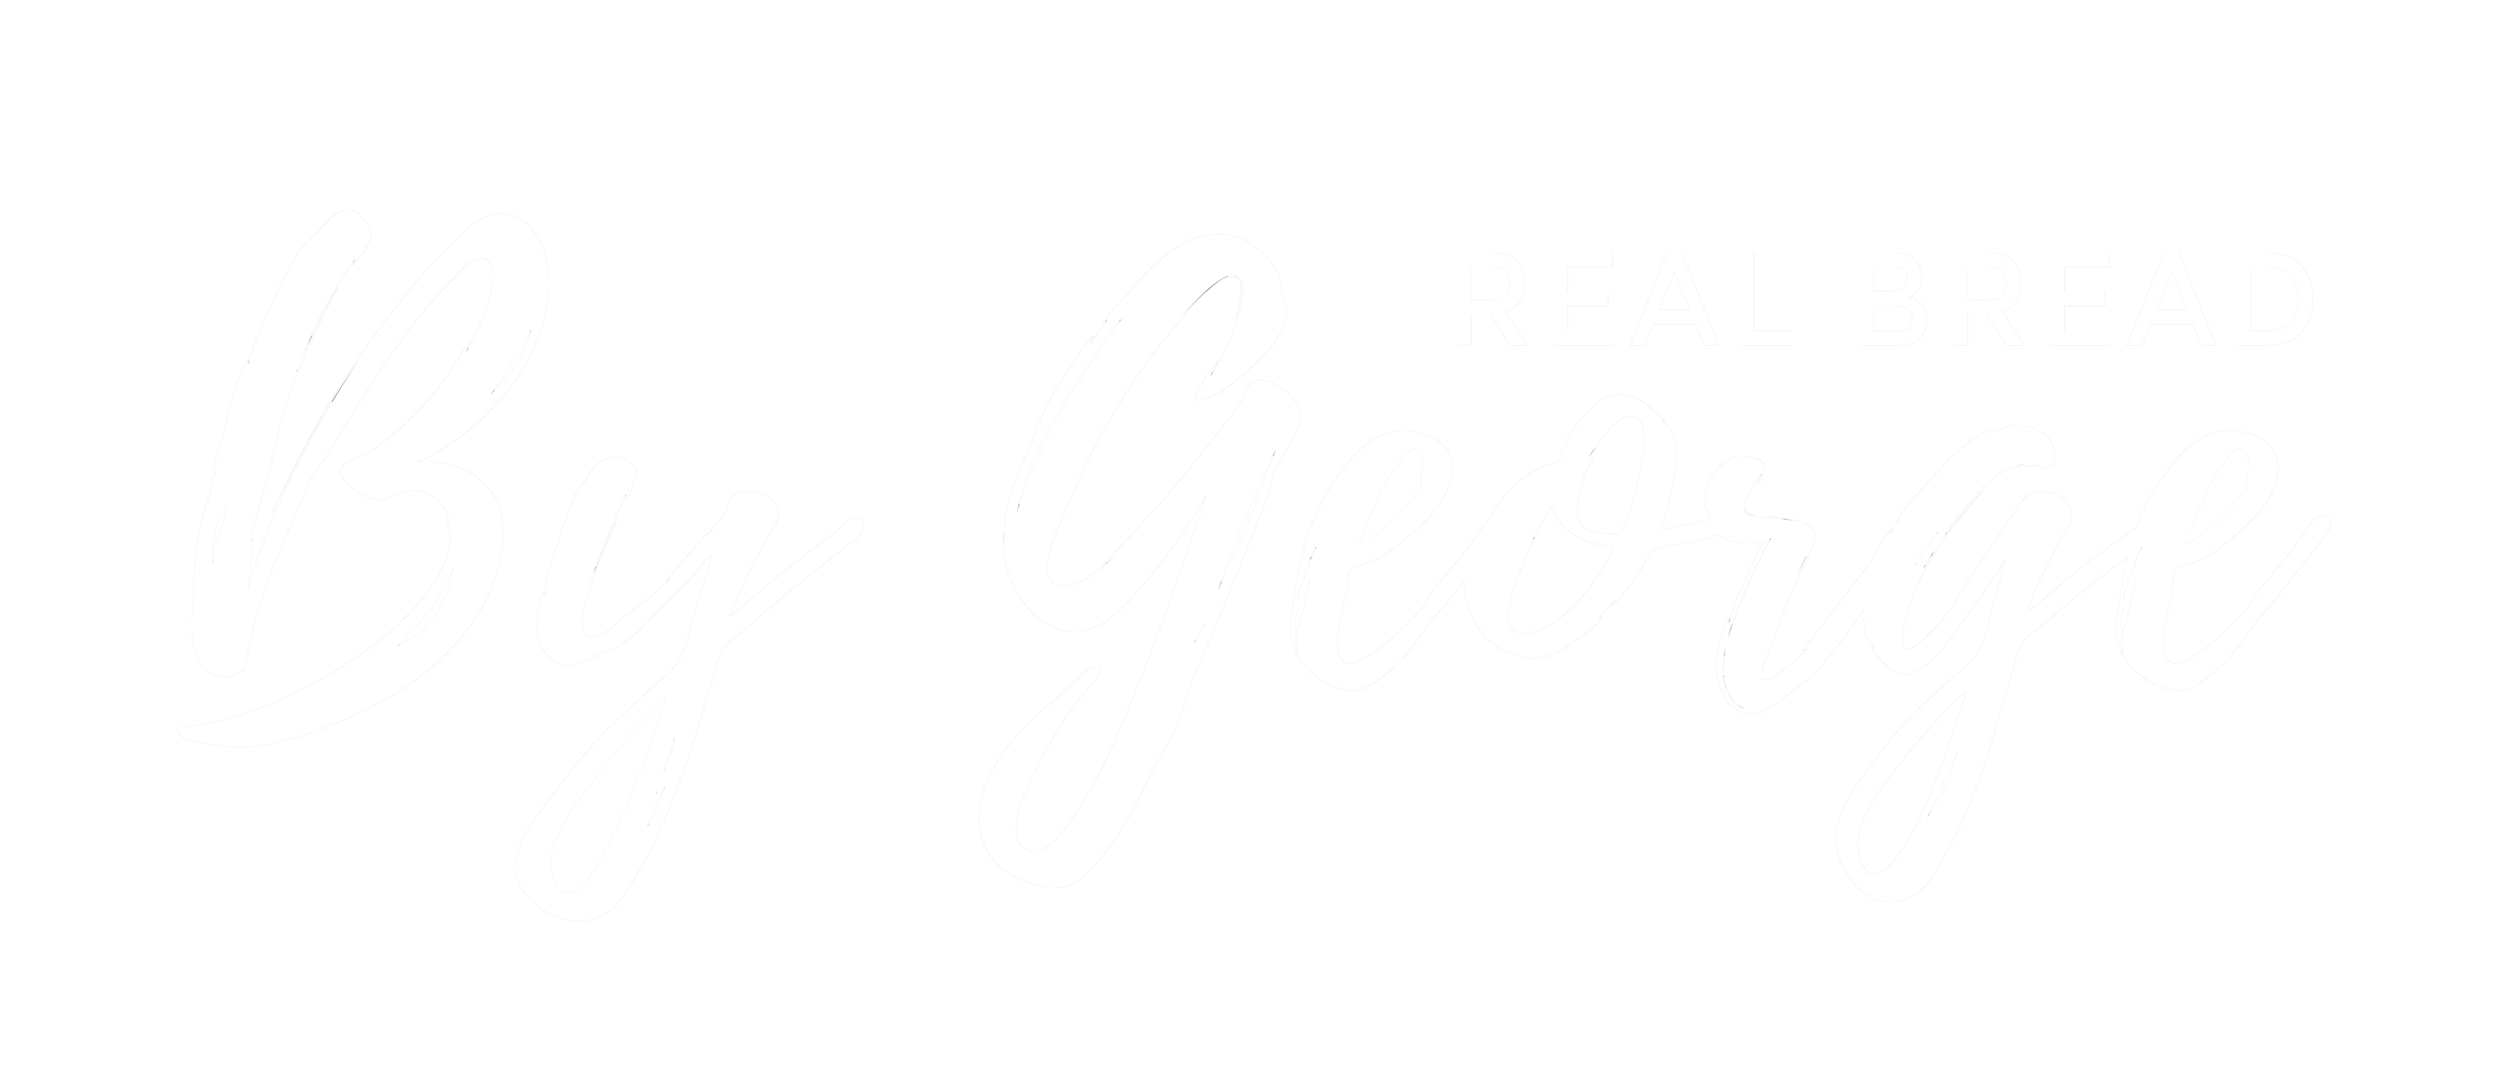 Real bread by George